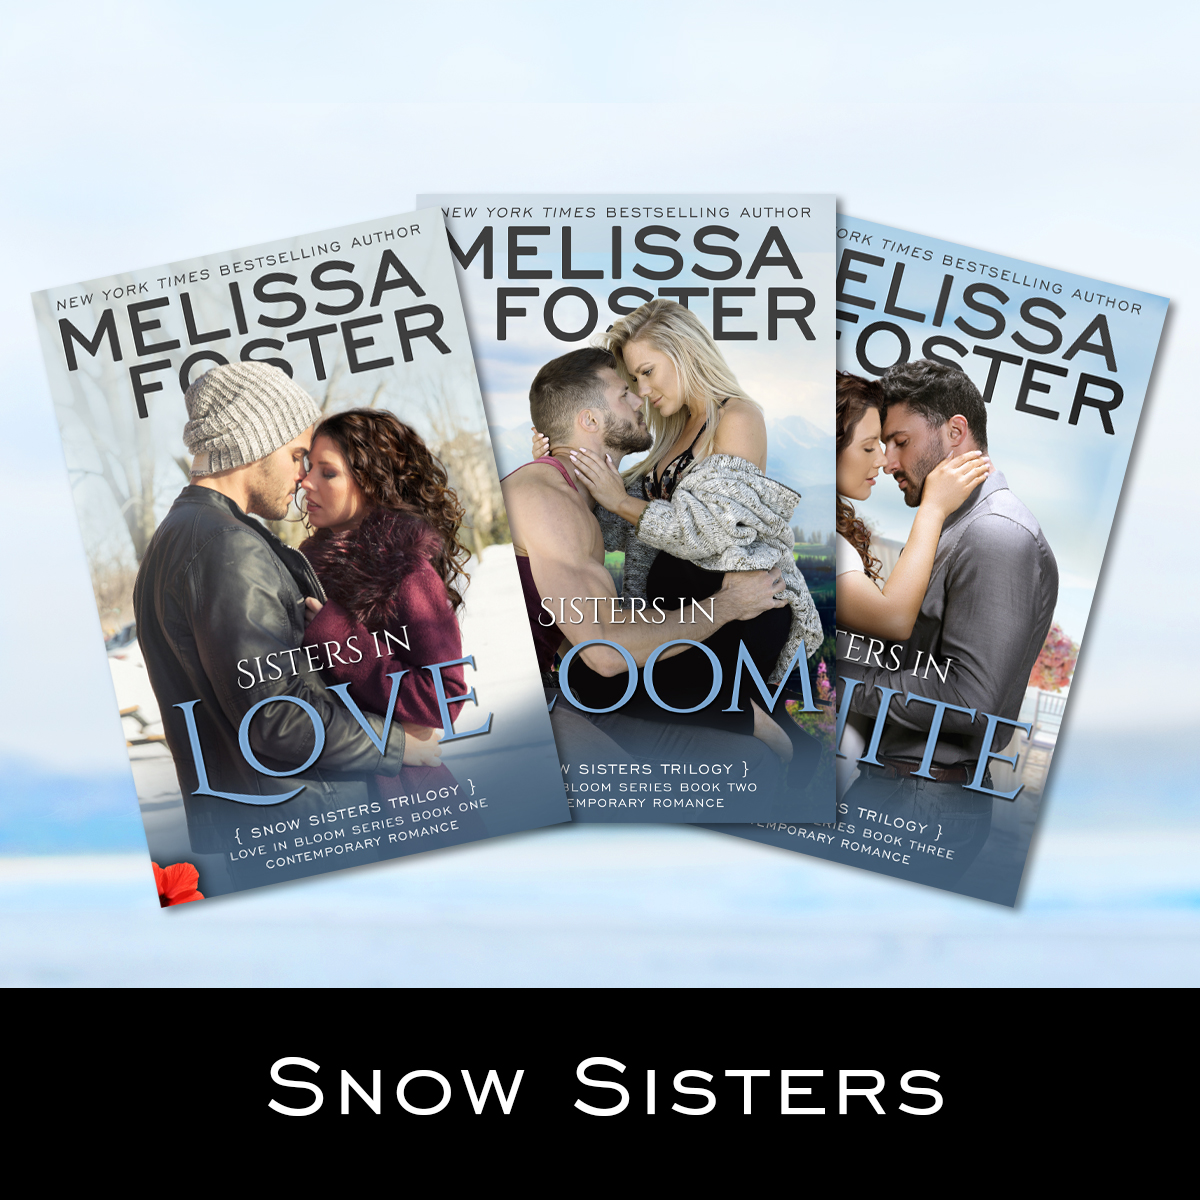 Snow Sisters by Melissa Foster